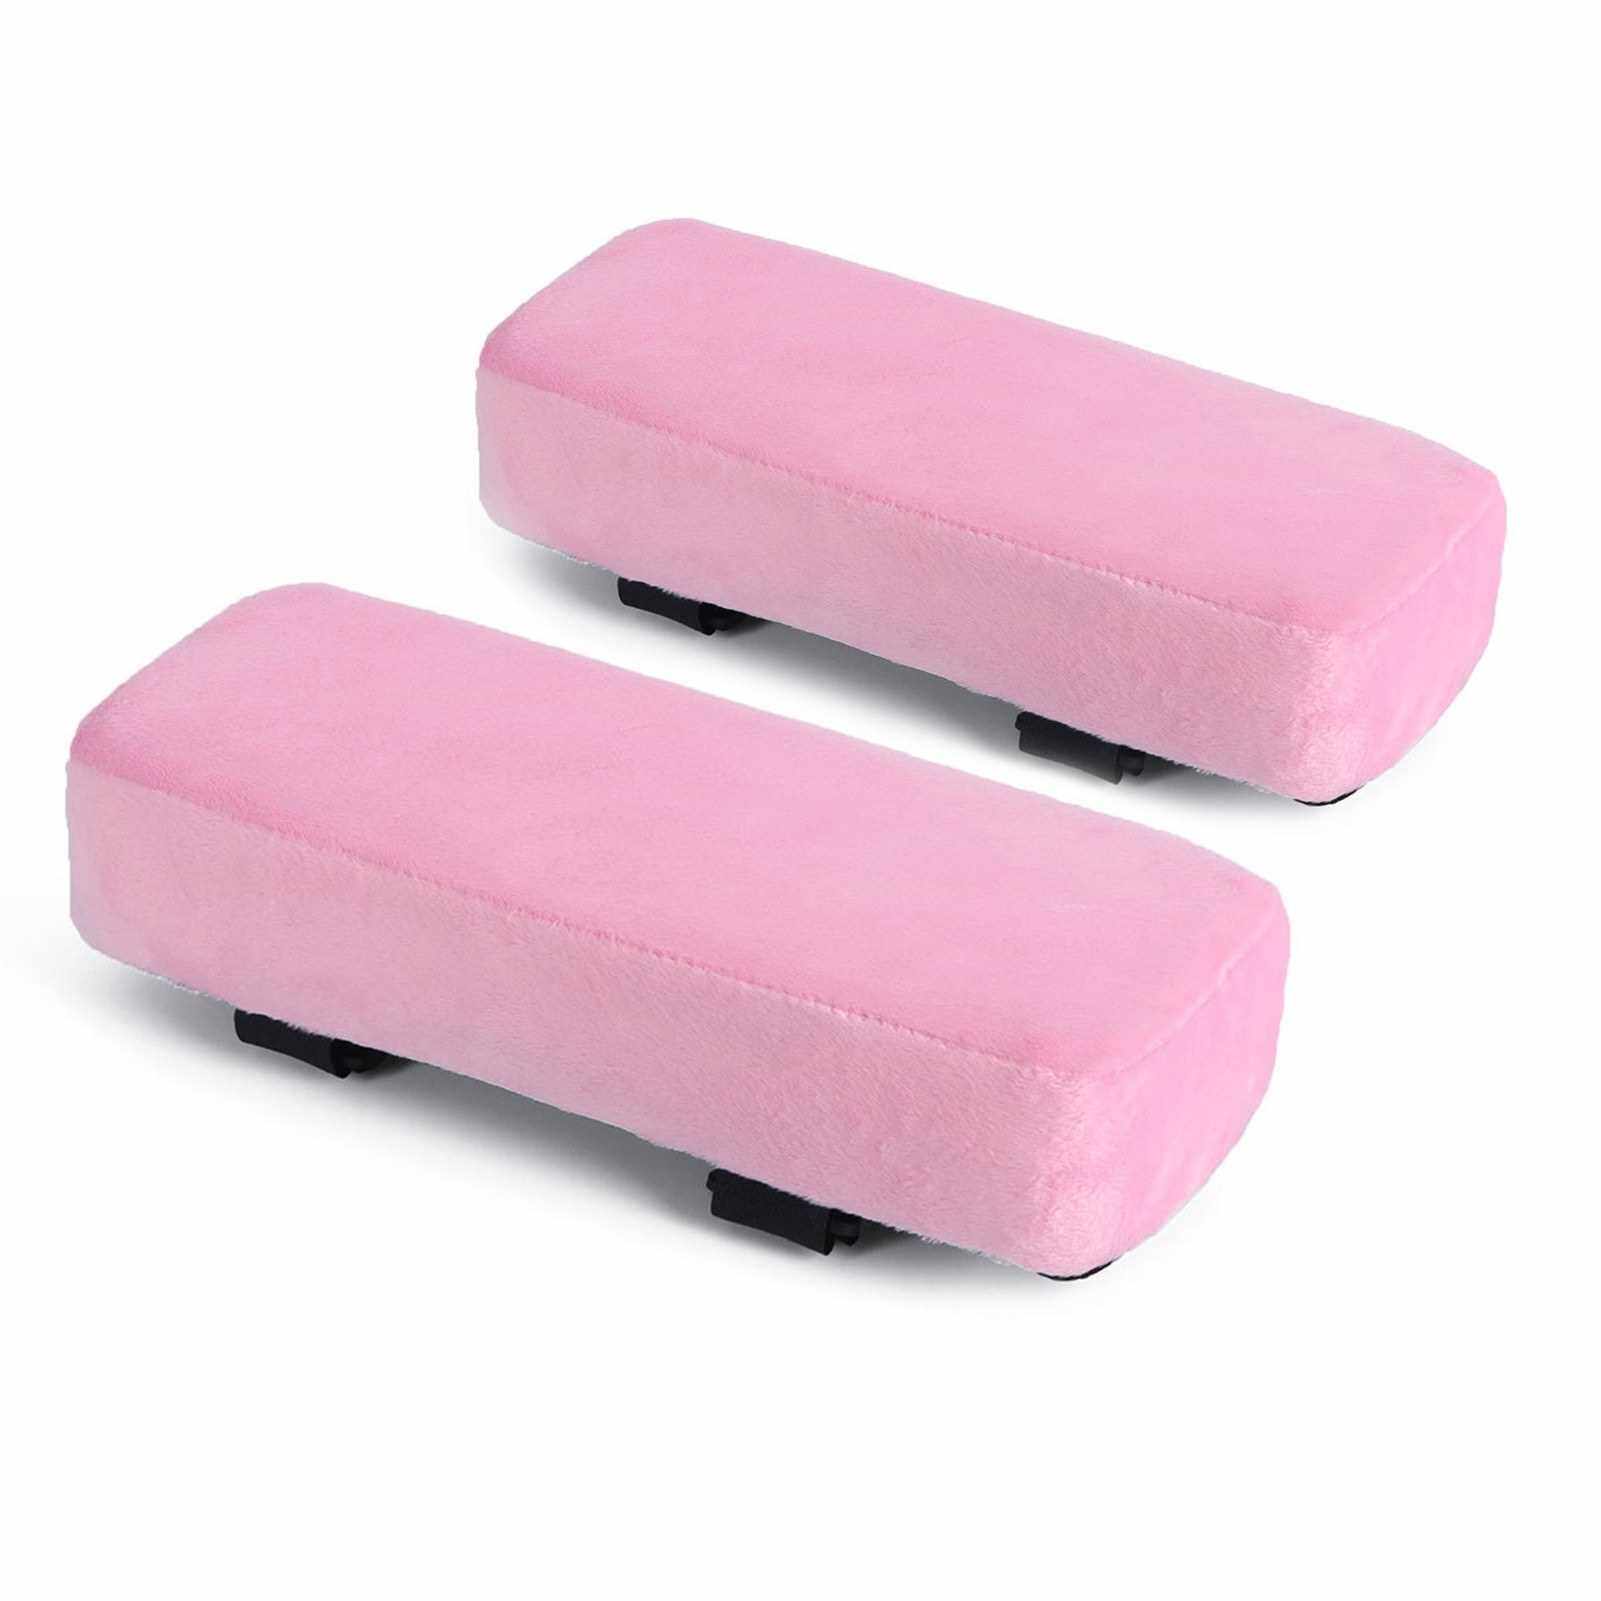 Game Chair Armrest Pads Cushions Computer Desk Chair Arm Cover Elbow Support Pressure Relief with Quick Rebound Sponge for Office School Home (Pink)